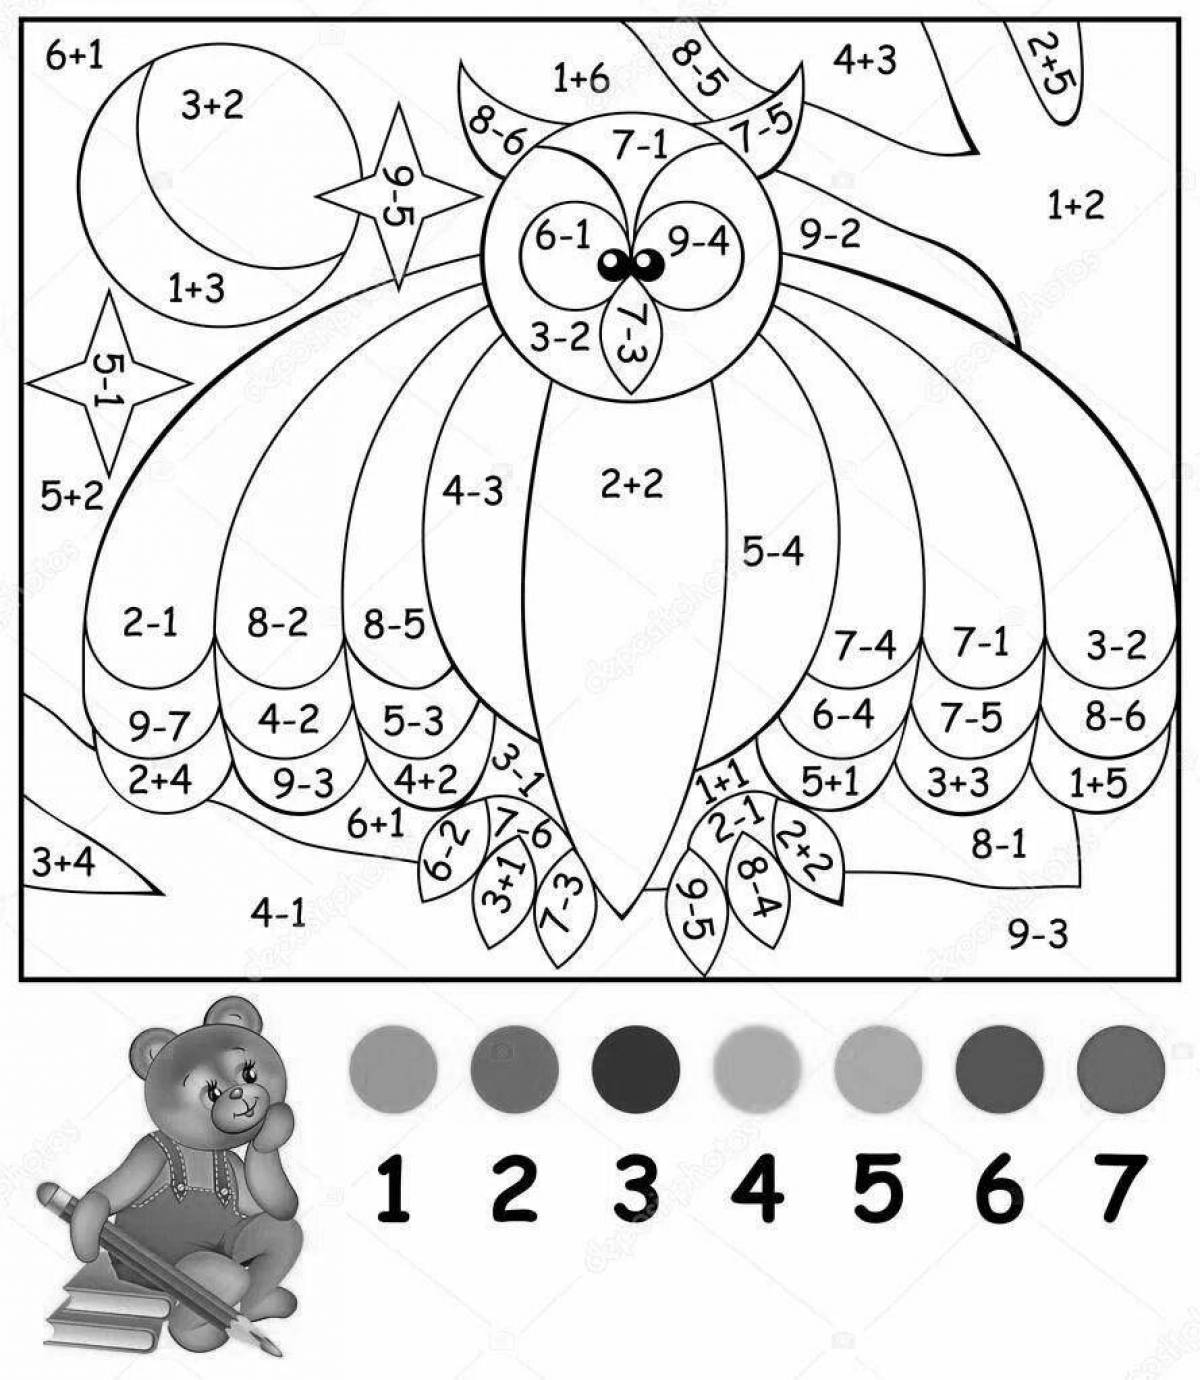 Charming coloring example solutions